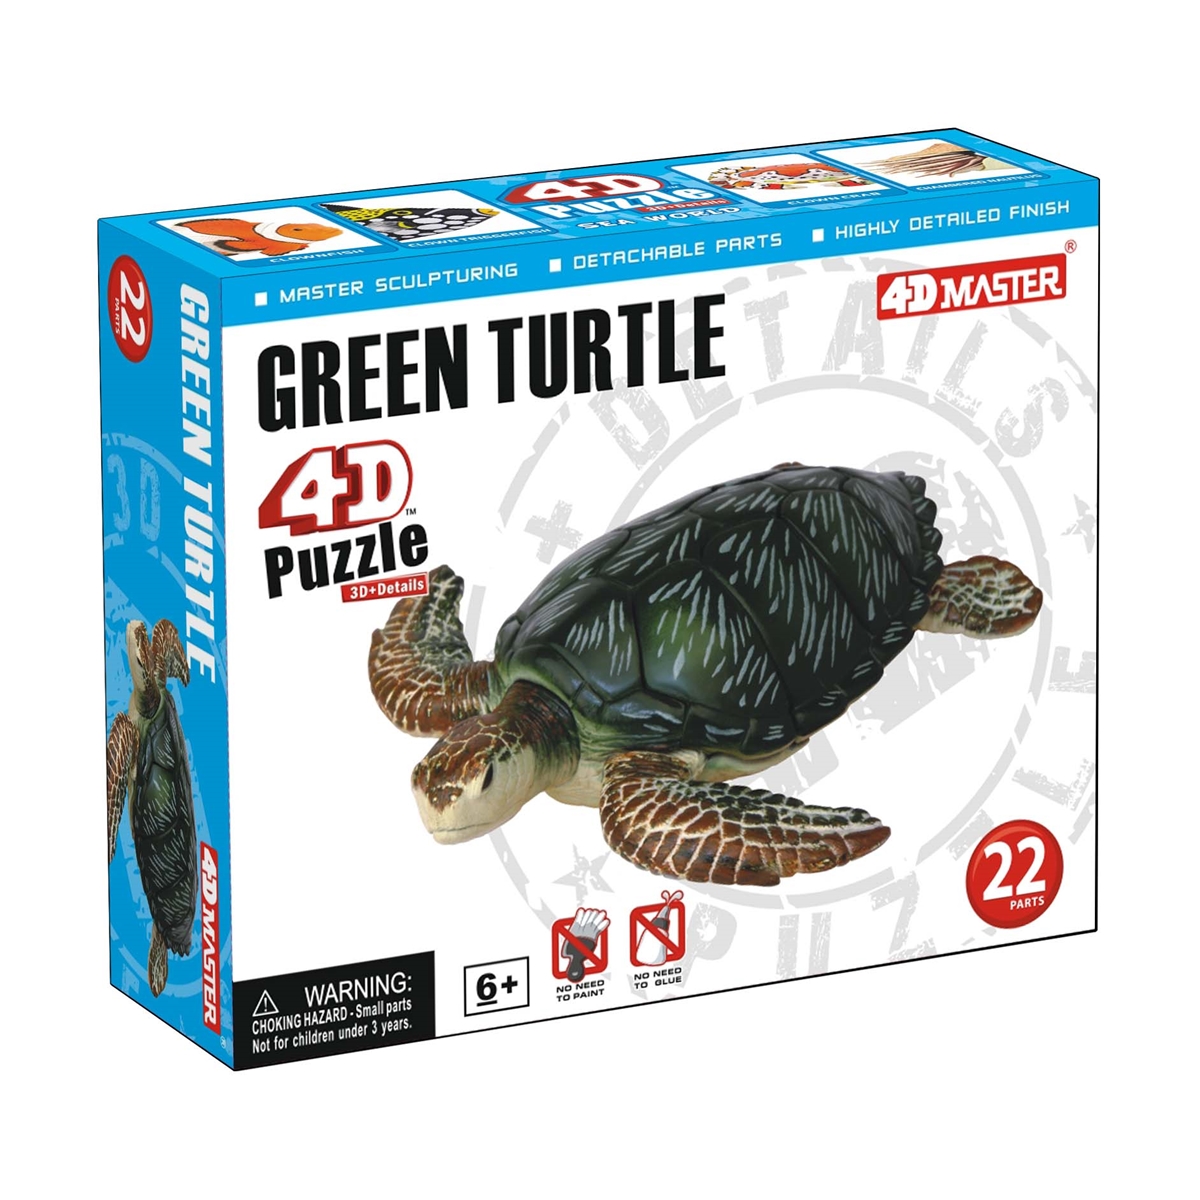 Green Turtle Model Puzzle